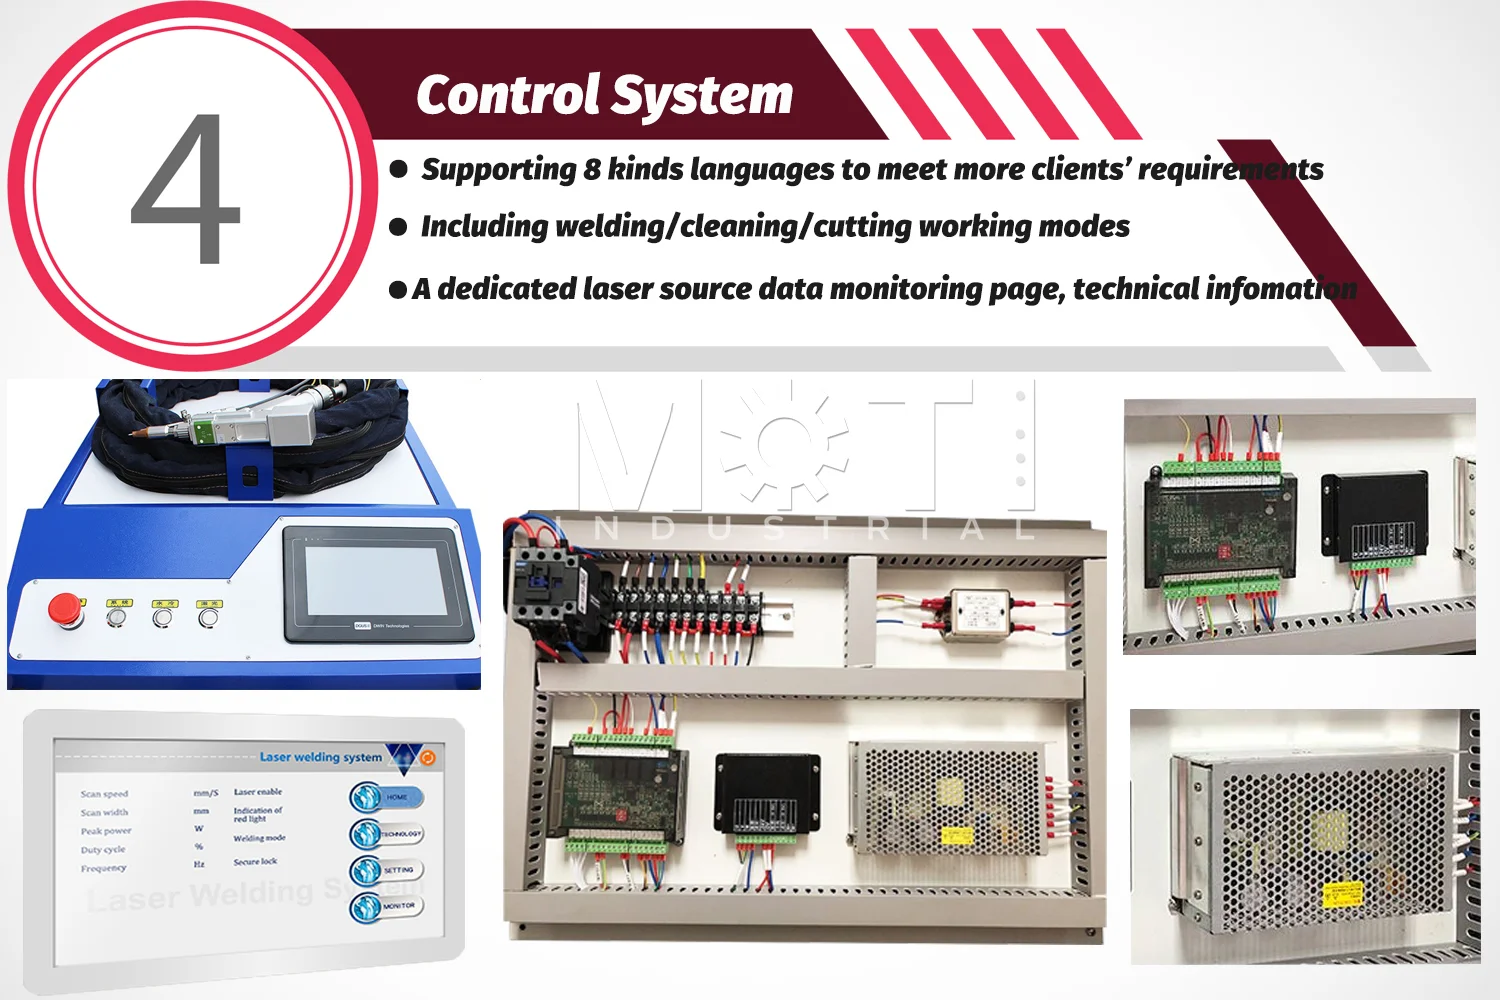 Control system for Laser Welding Cleaning Cutting Machine 3 in 1 